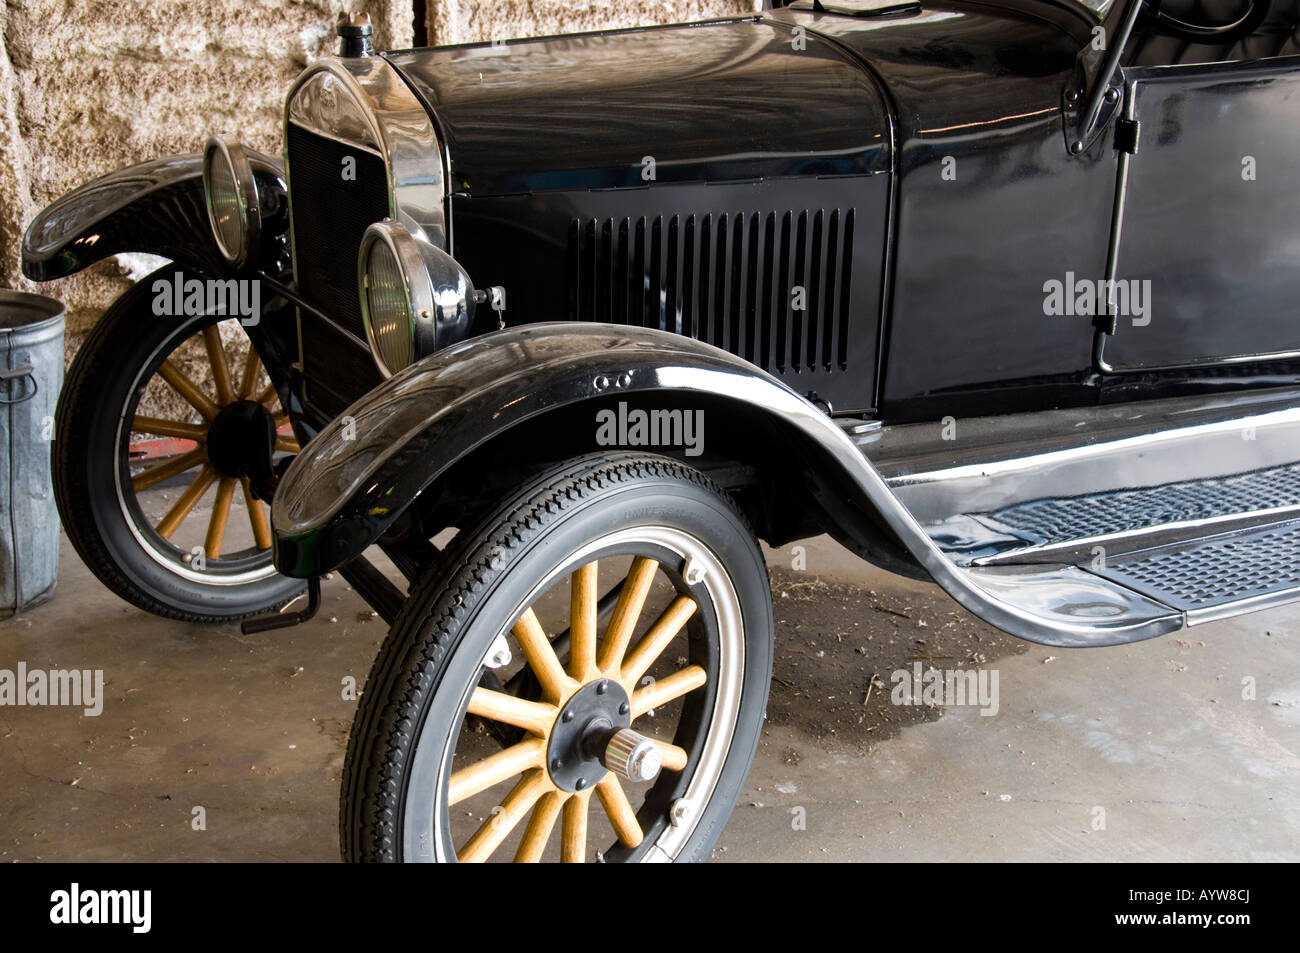 The front end of a classic 1928 Model T Ford 4-door touring car. Stock Photo